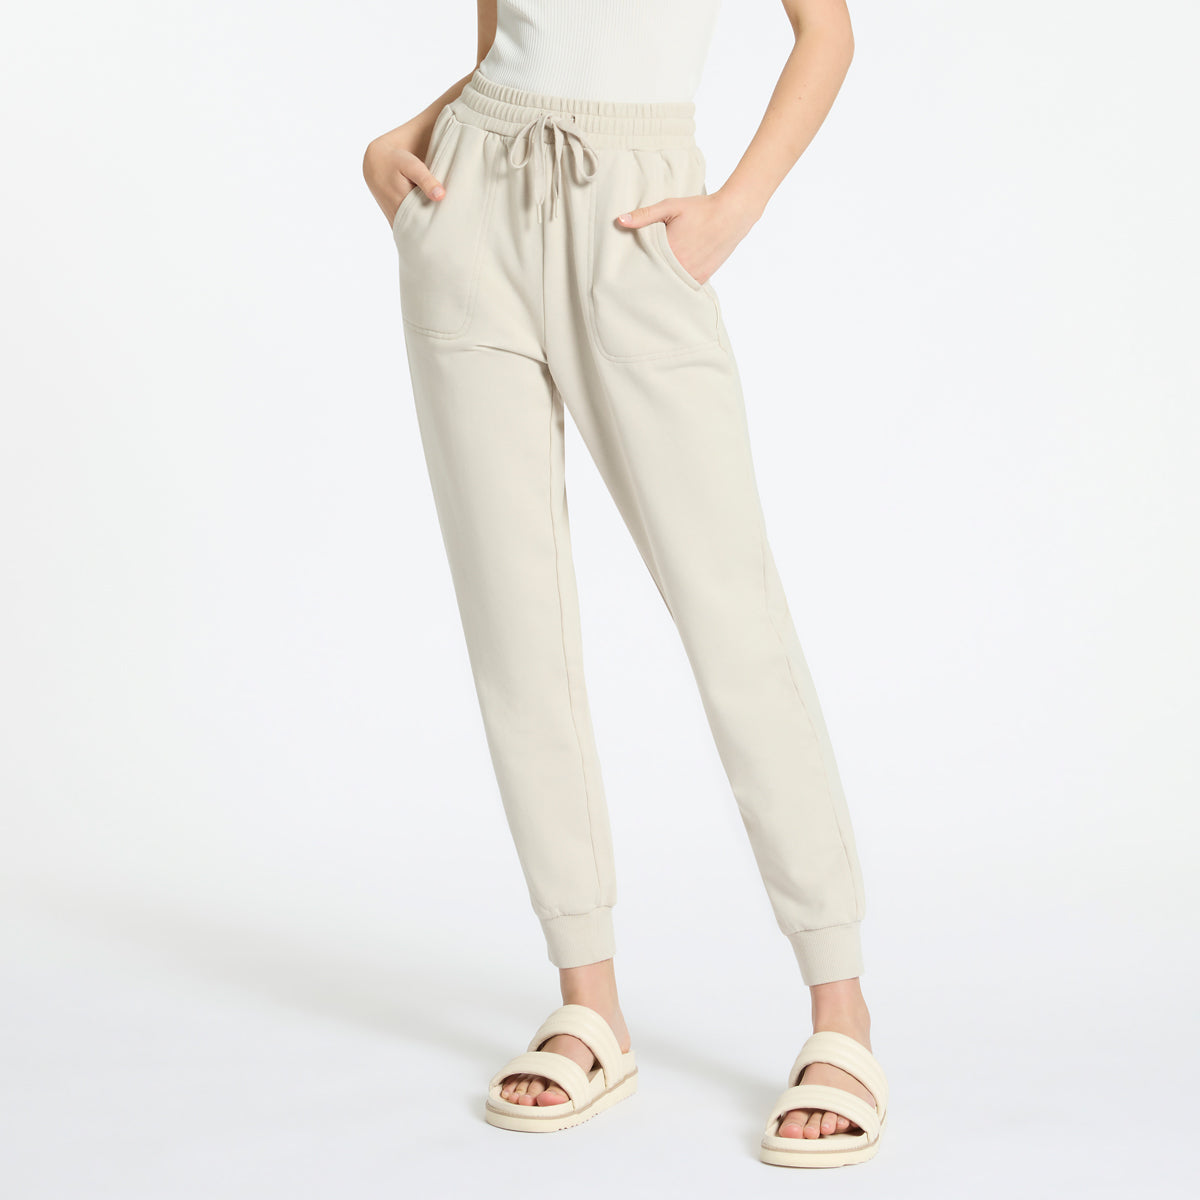 As You Wake - Women's Track Pant / Dove Grey